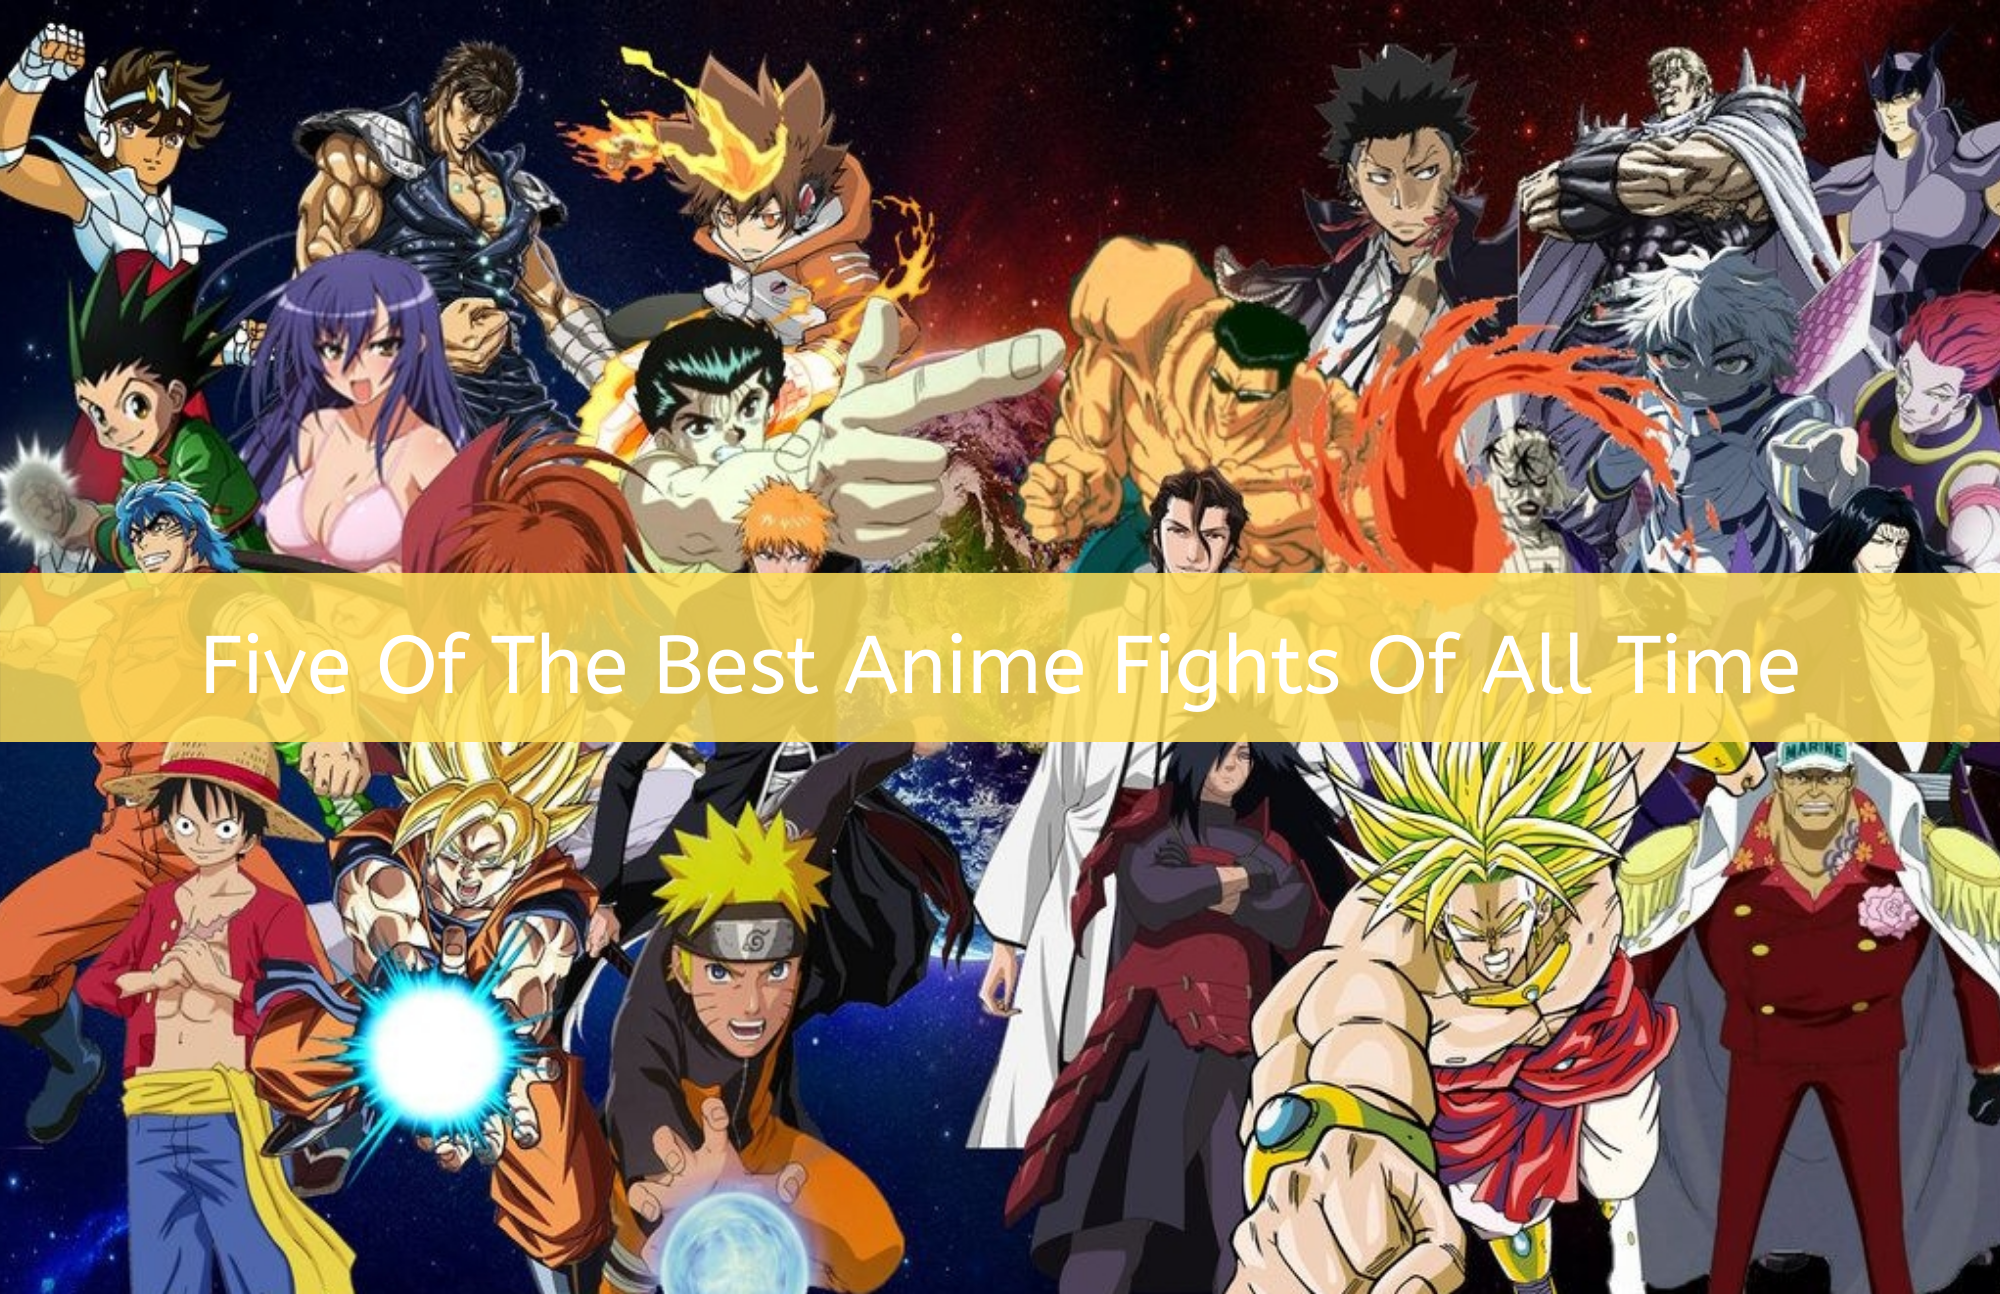 Five Of The Best Anime Fights Of All Time That You Should Watch